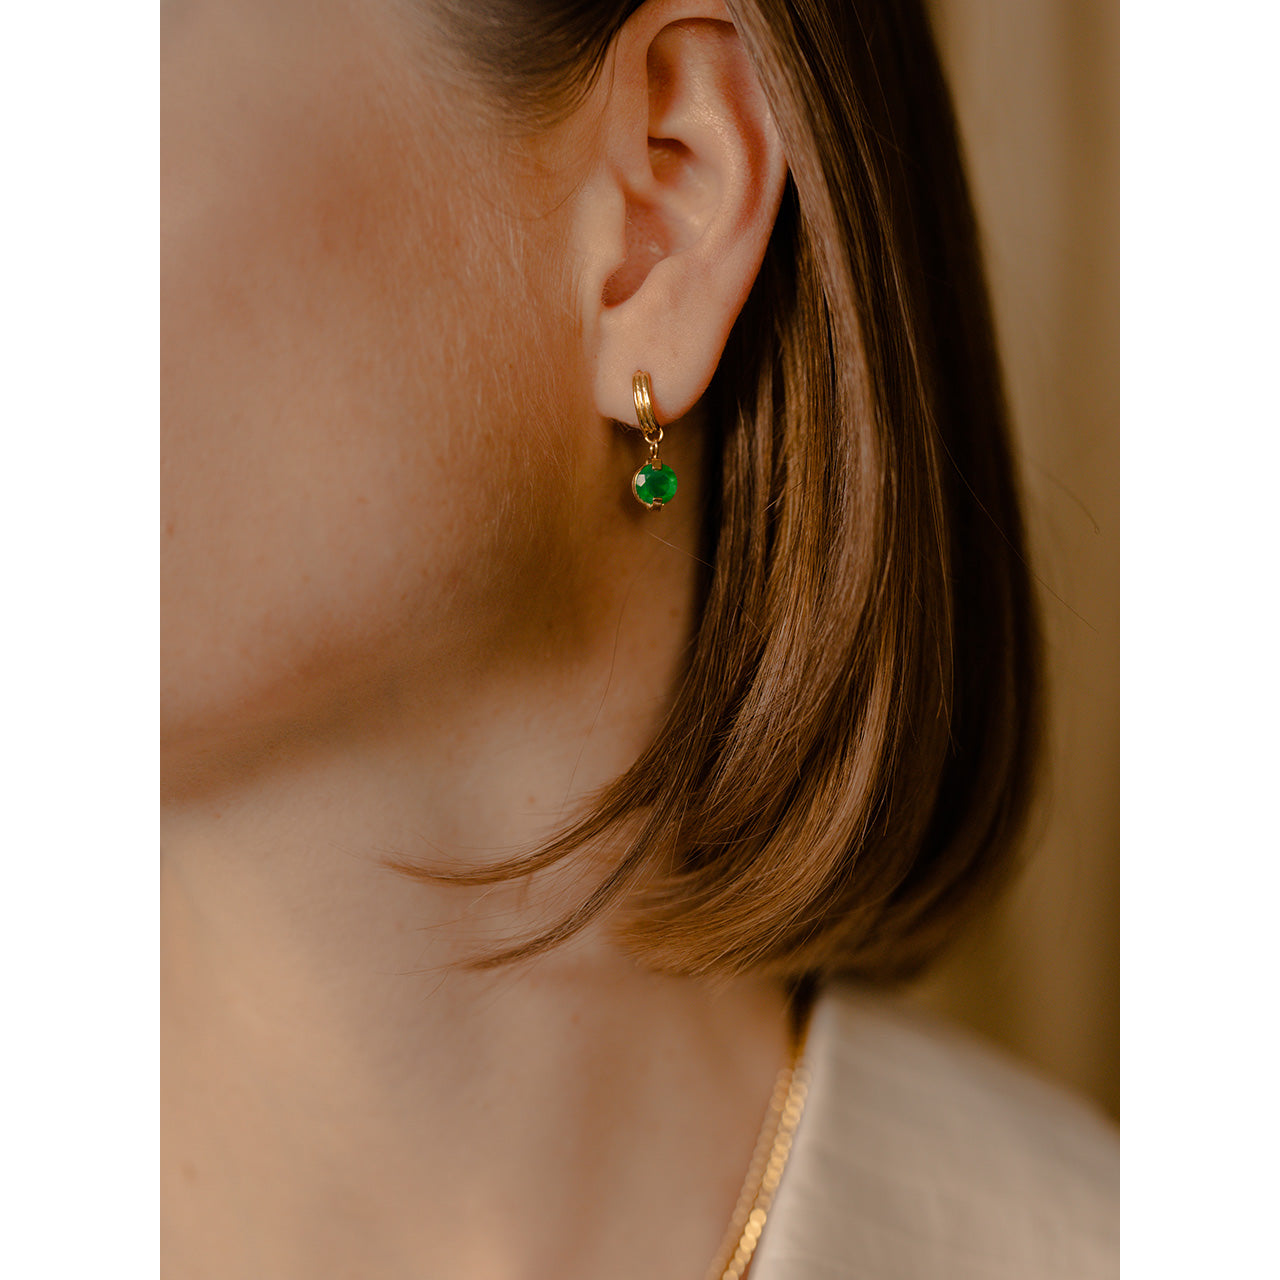 Introducing our Subtle Earrings, a perfect blend of elegance and vibrance.